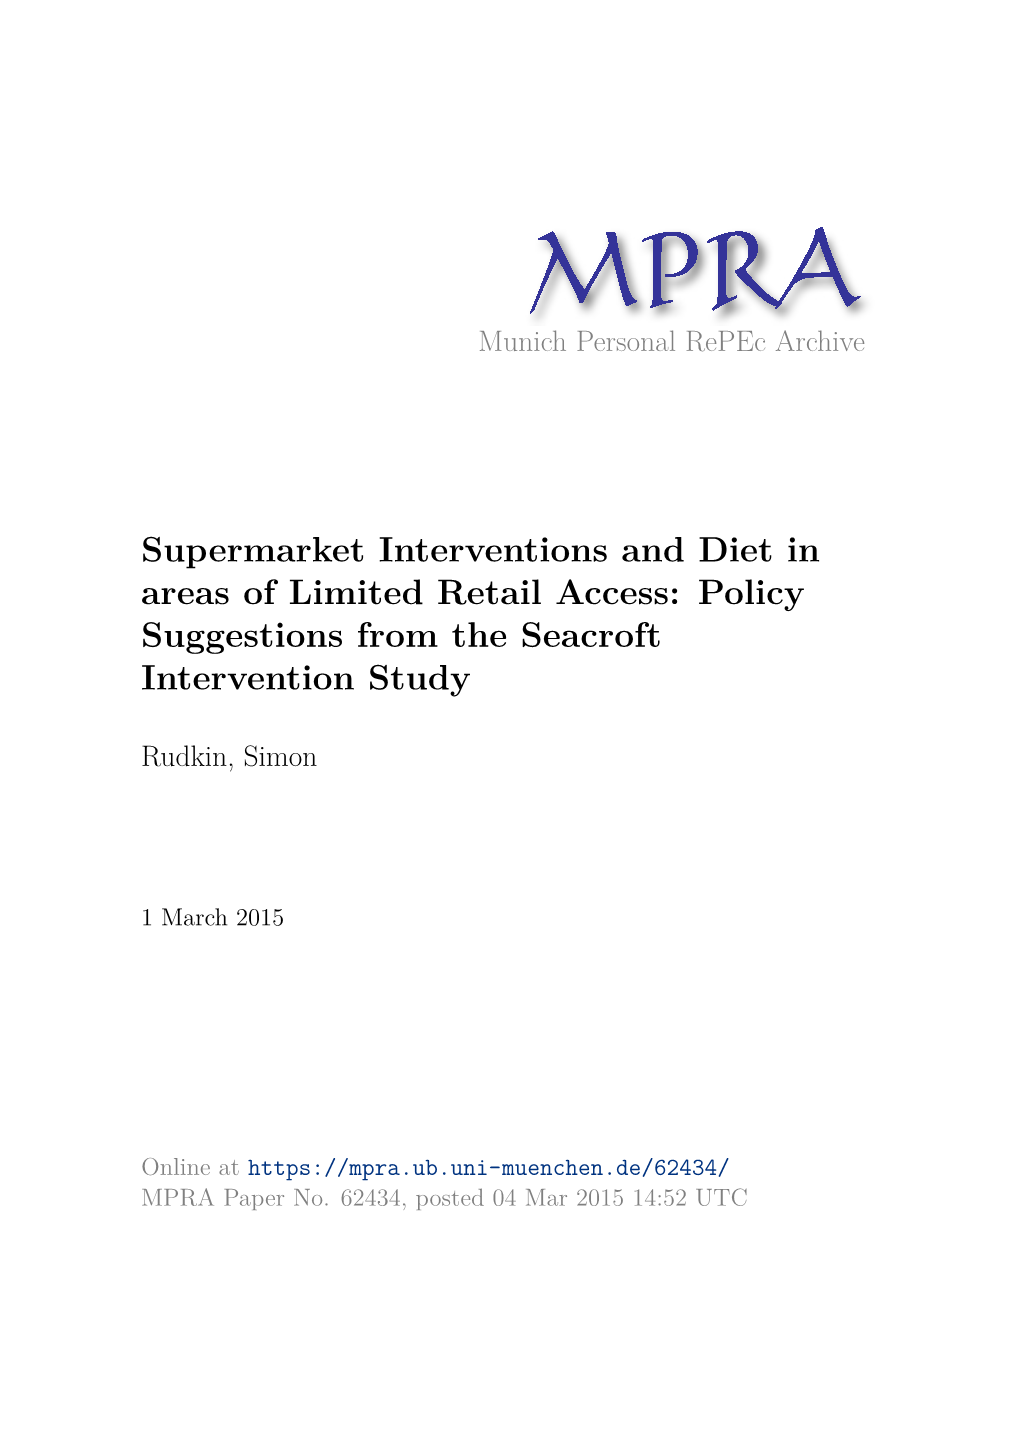 Supermarket Interventions and Diet in Areas of Limited Retail Access: Policy Suggestions from the Seacroft Intervention Study